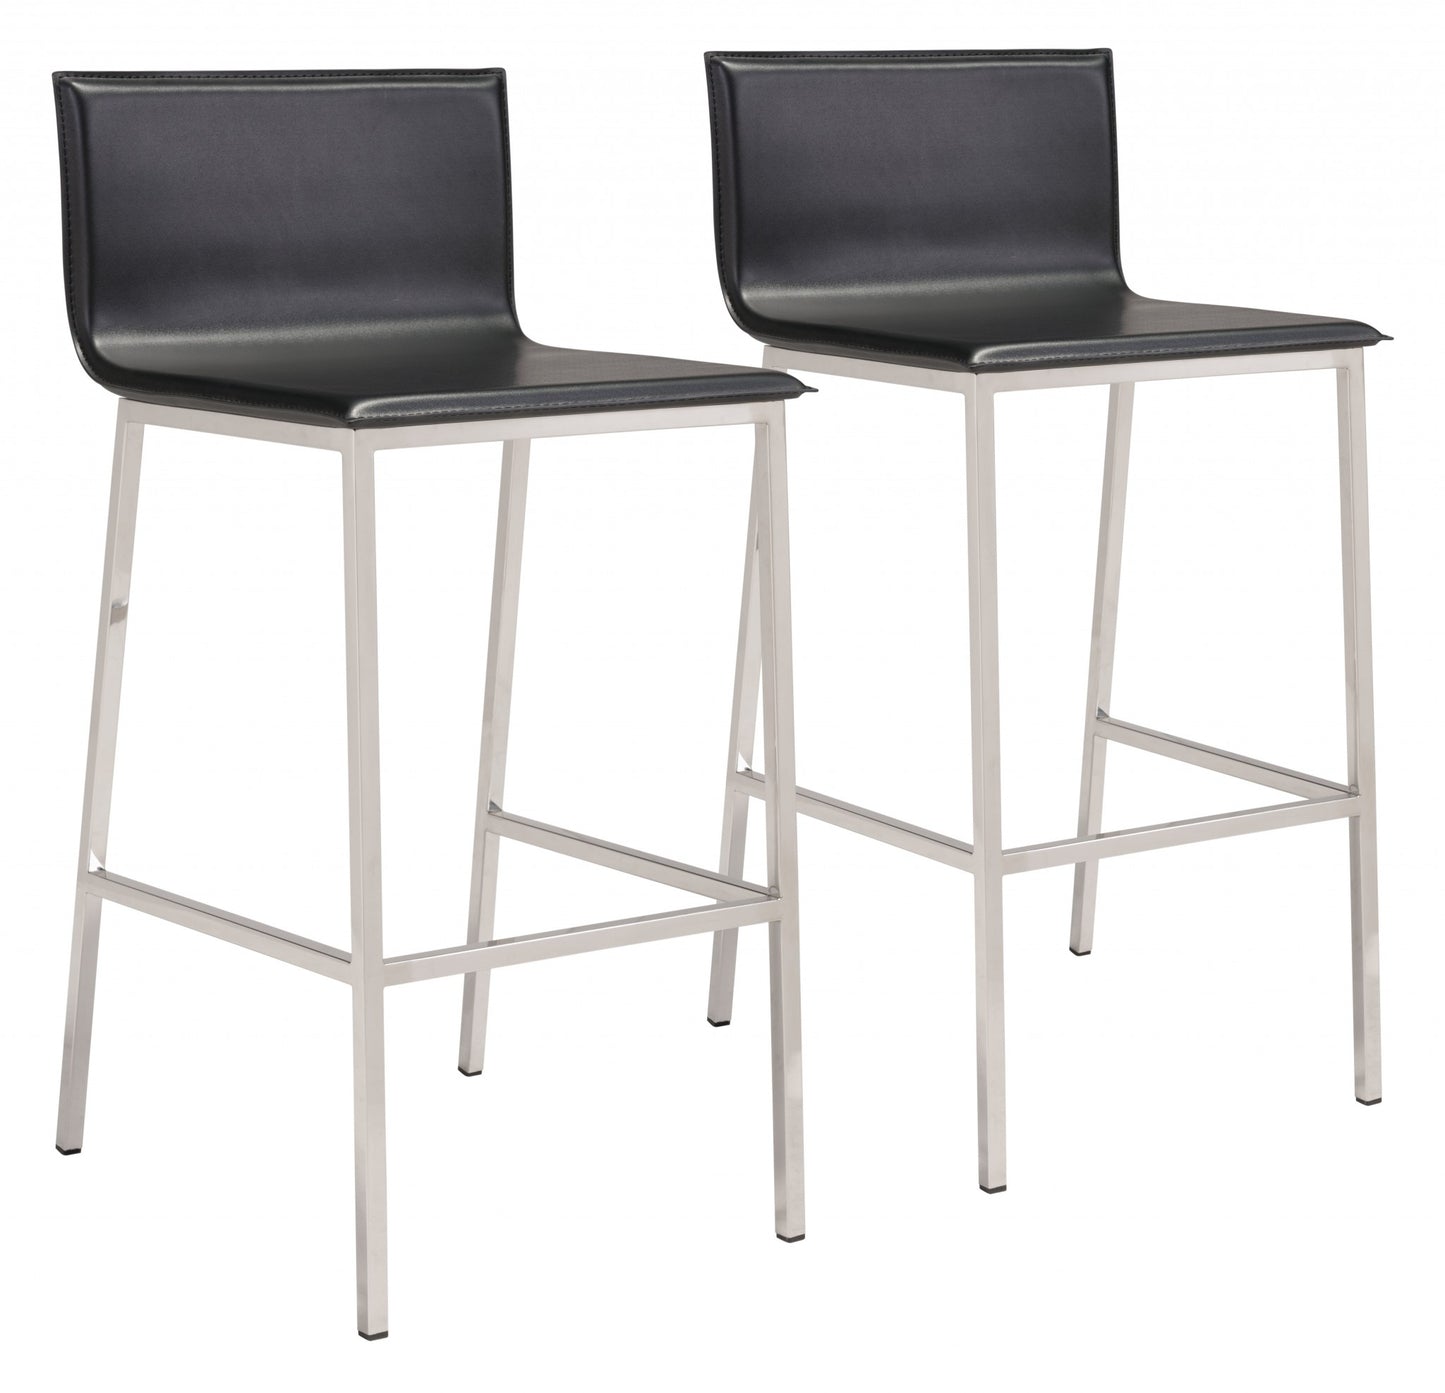 Set Of Two 39" Black And Silver Steel Low Back Bar Height Chairs With Footrest By Homeroots